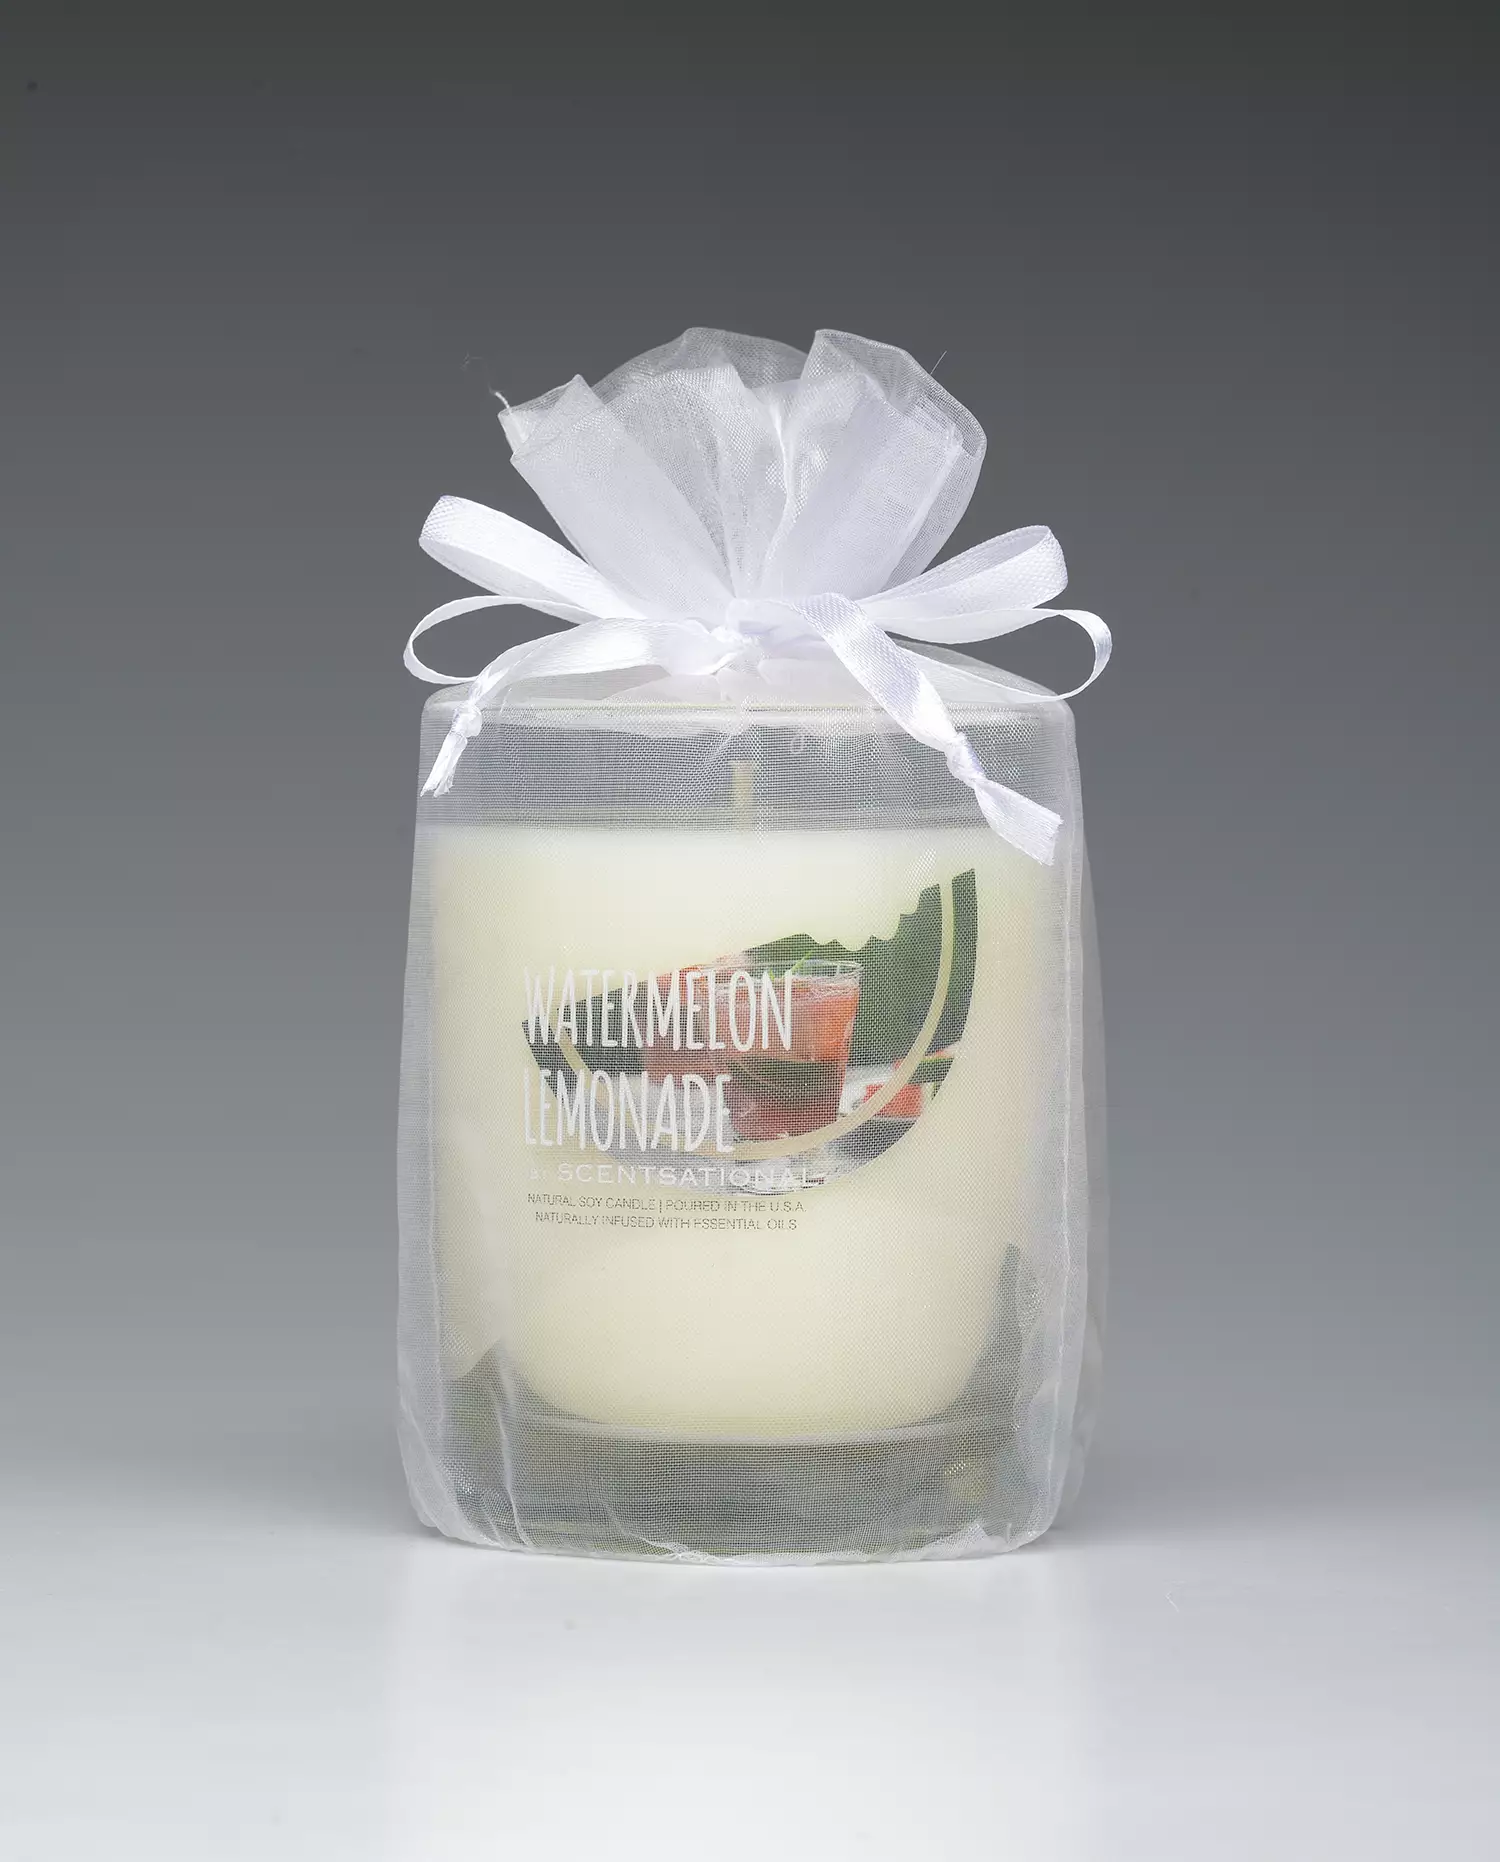 Candle Warmers Etc Watermelon Lemonade Wax Melts - Fruit Scented Soy Blend  with High Fragrance Load in the Wax Melts & Warmers department at